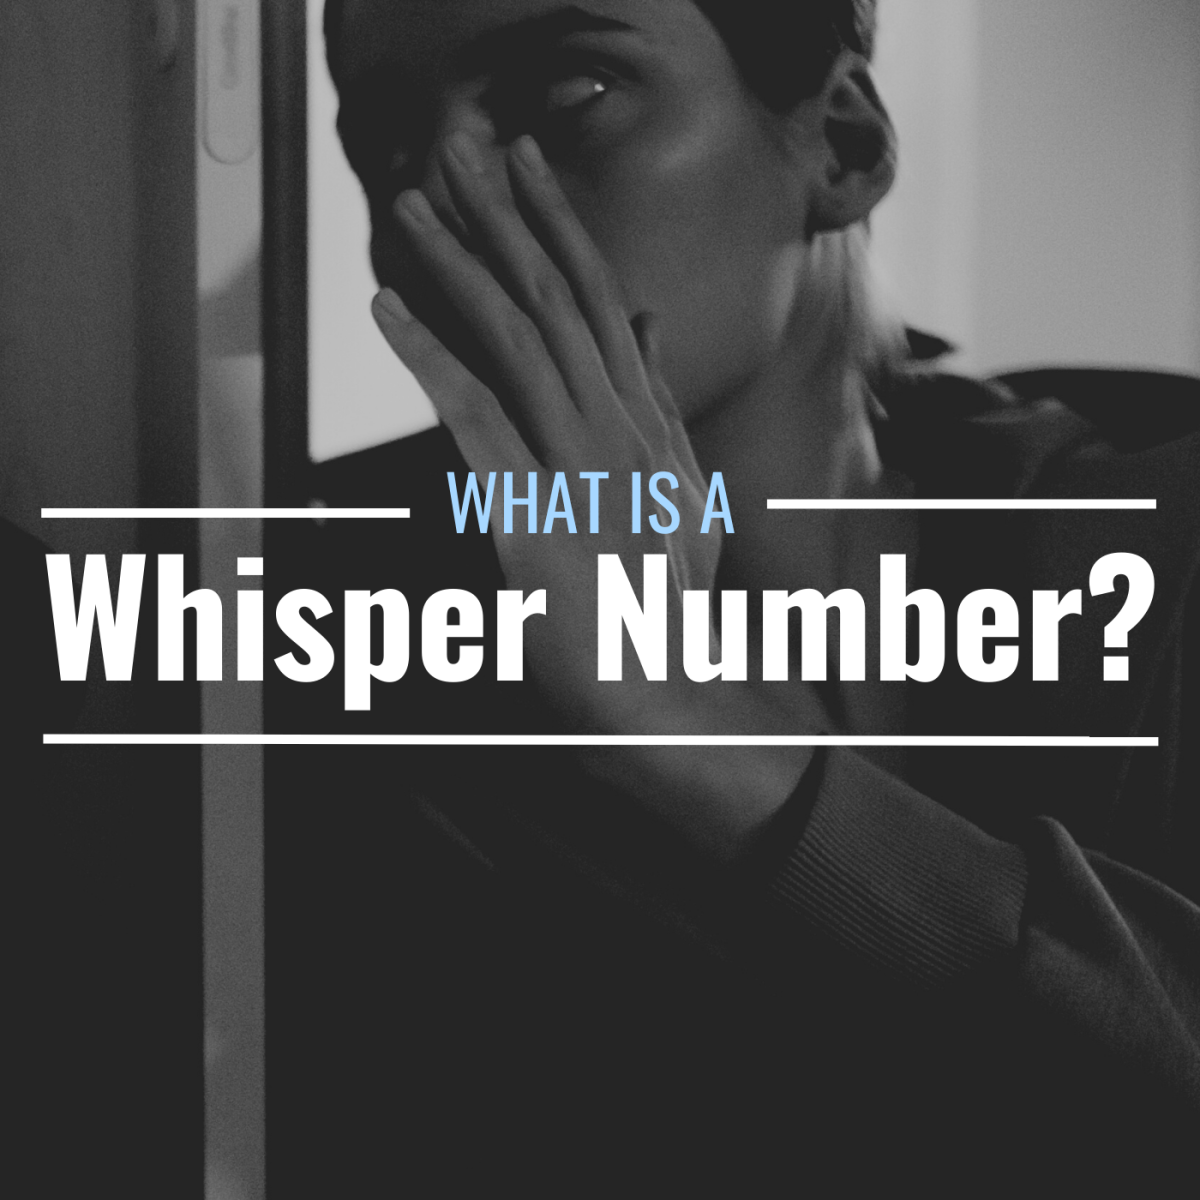 Photo of a person whispering to another person with text overlay that reads "What Is a Whisper Number?"